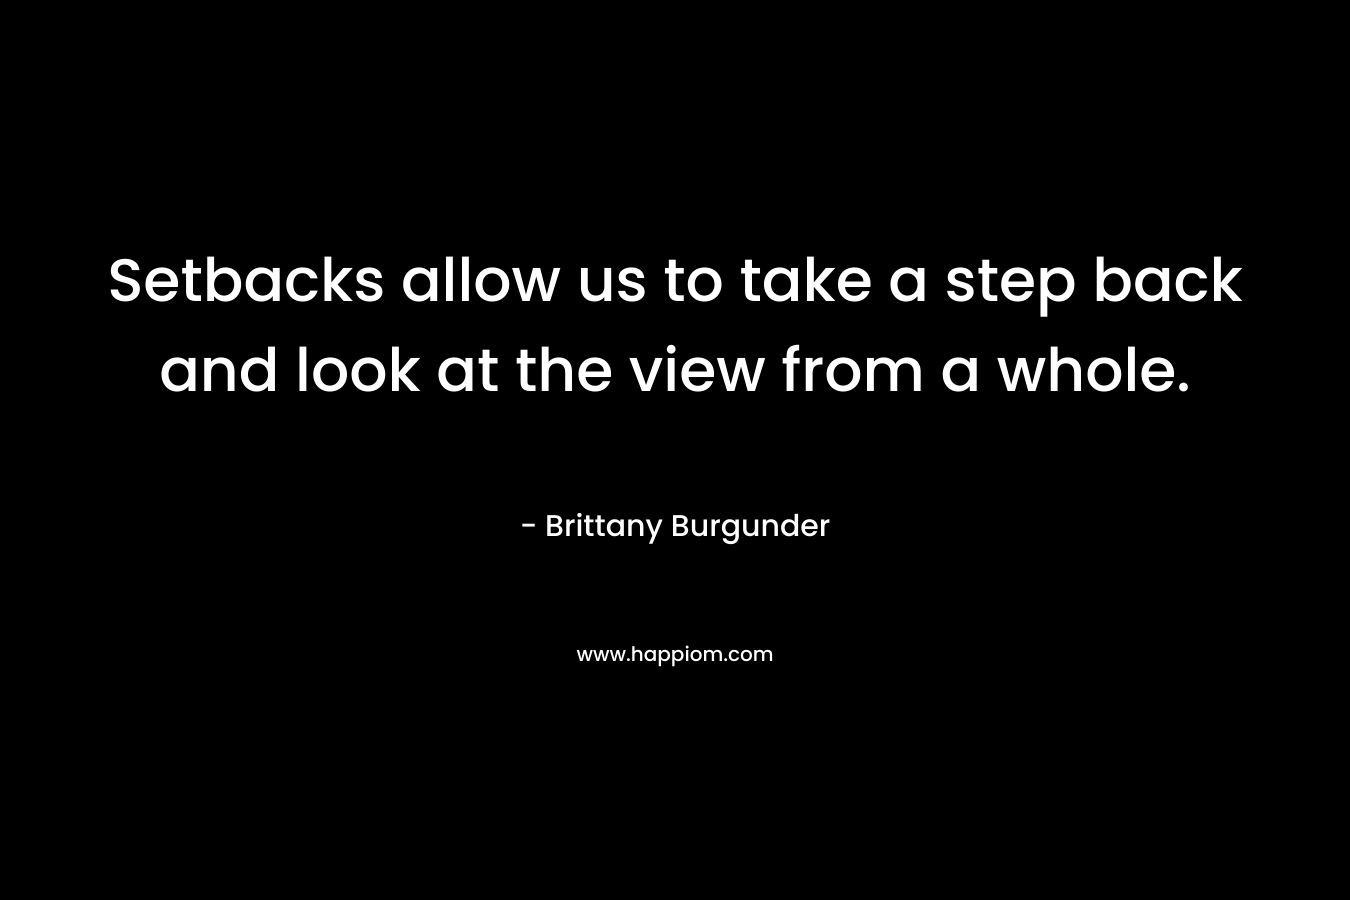 Setbacks allow us to take a step back and look at the view from a whole.